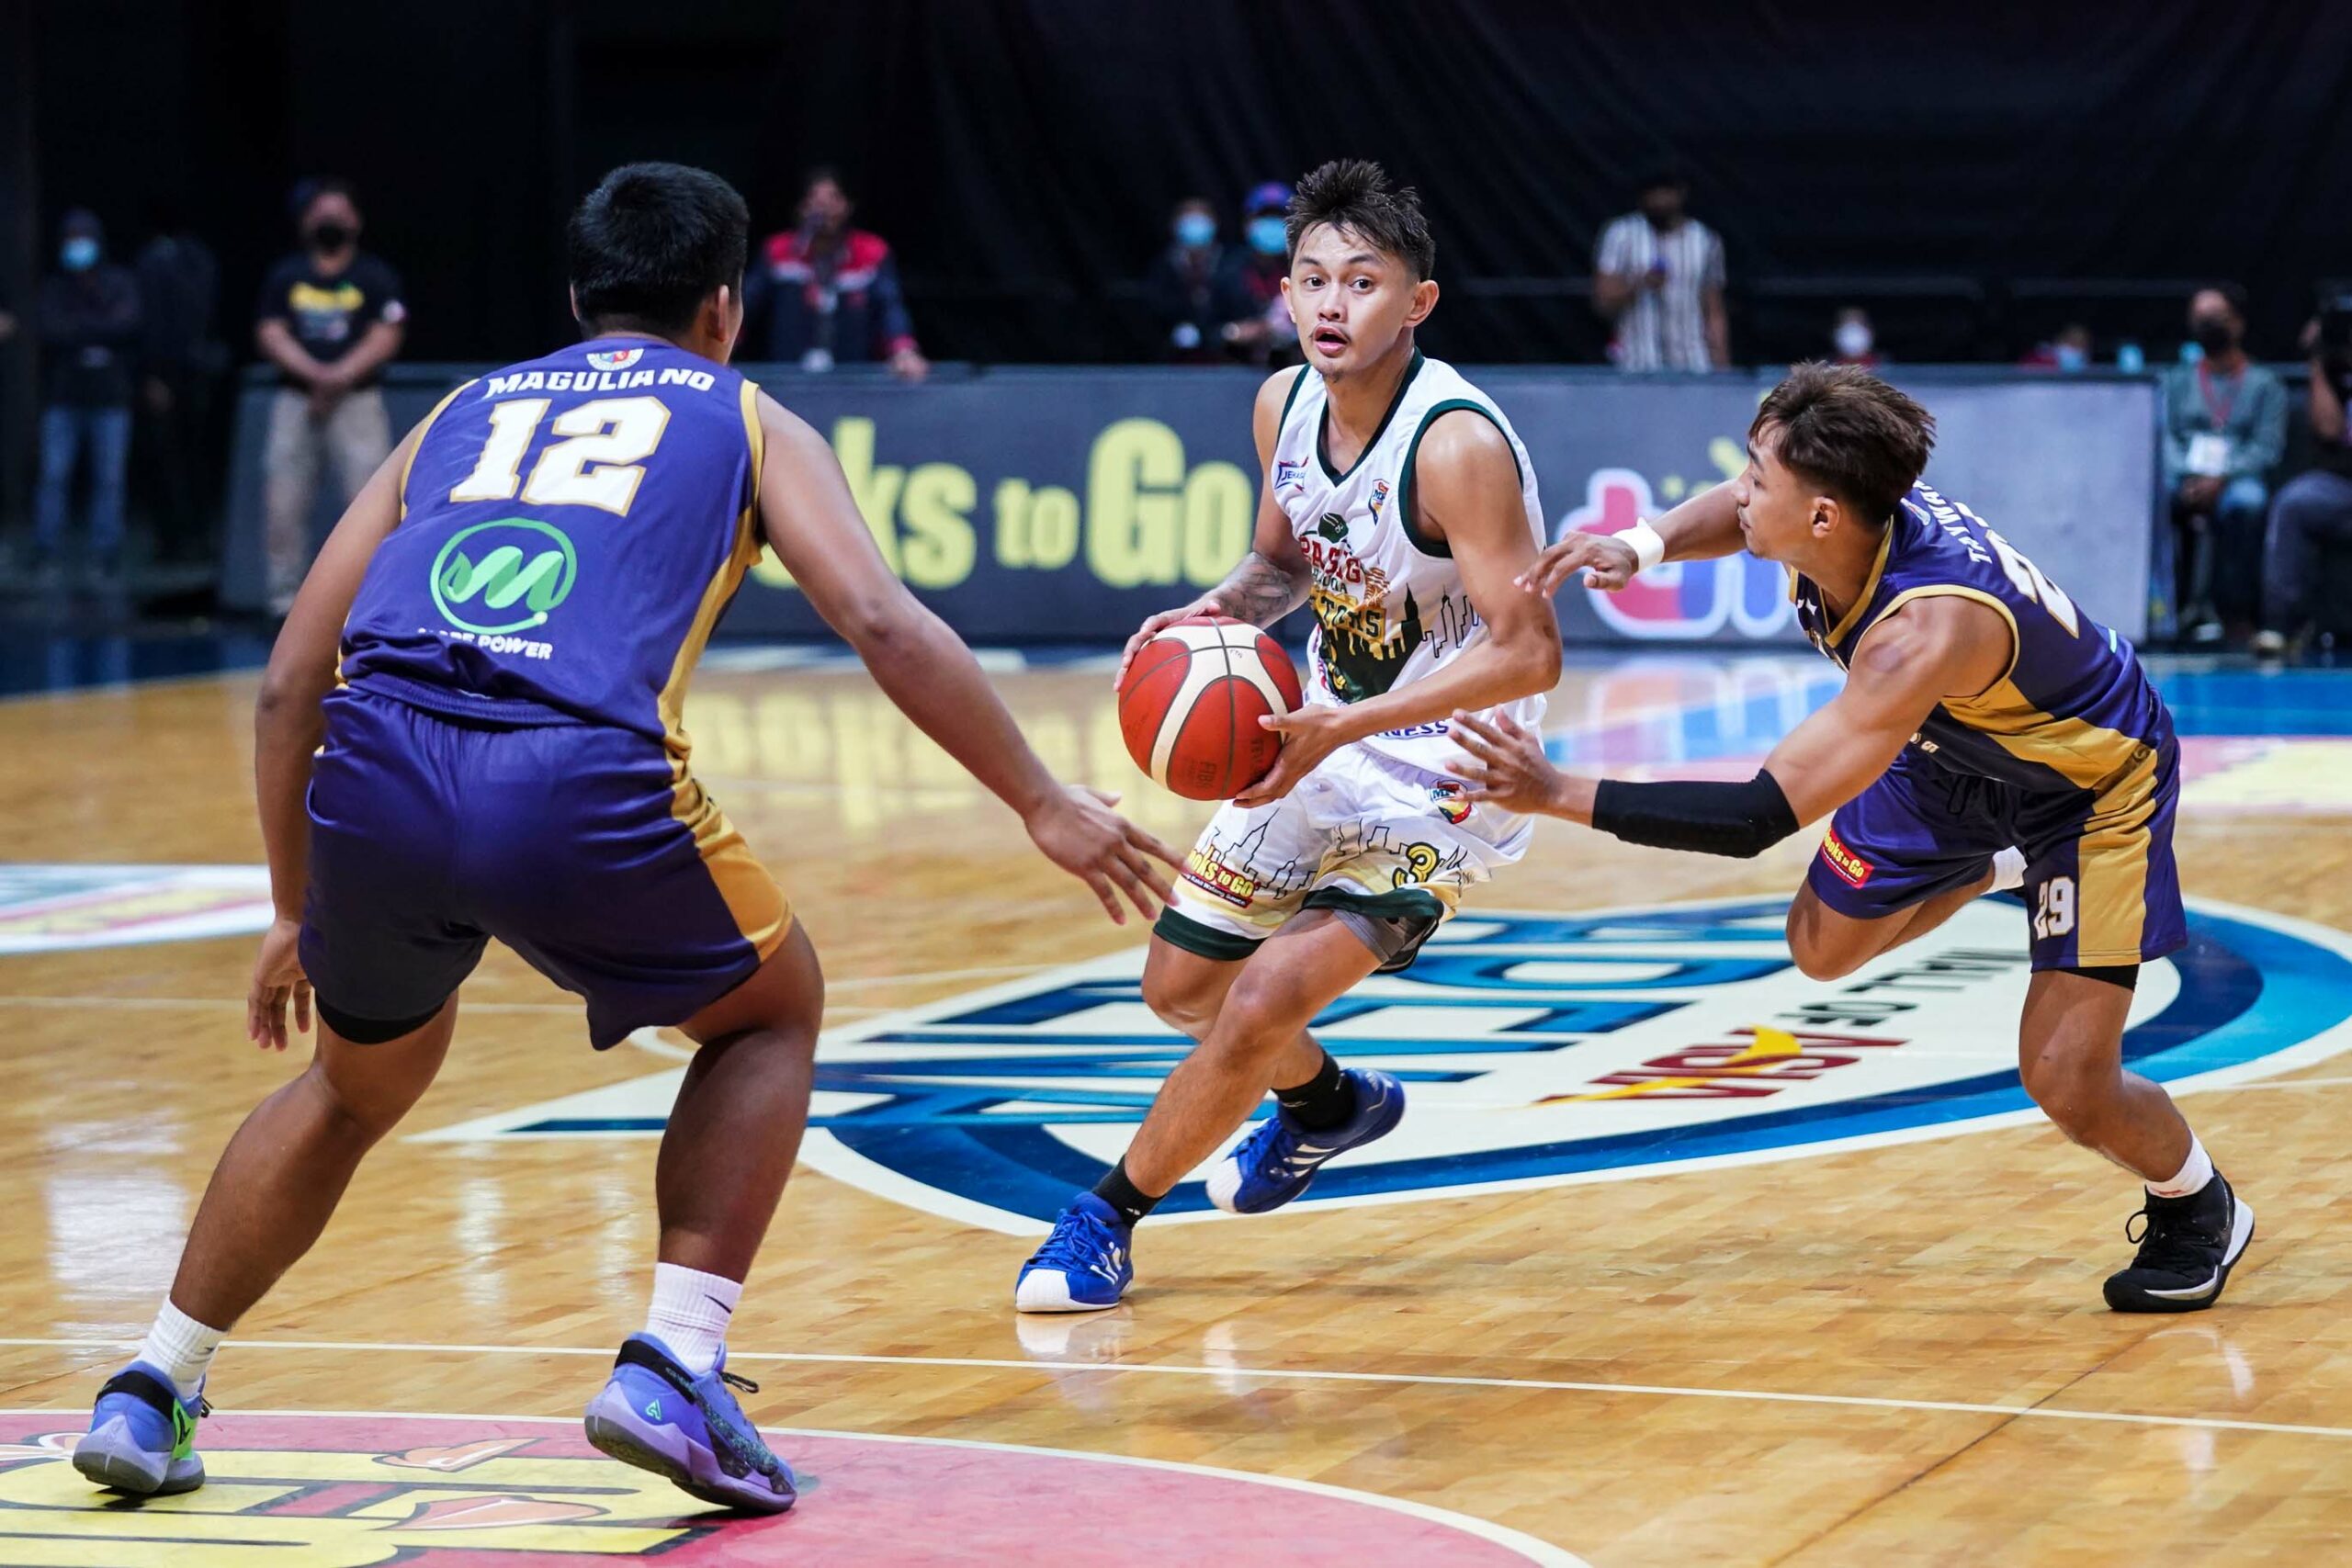 2021-Chooks-MPBL-Pasig-vs-Iloilo-Fran-Yu-scaled Pasig's Fran Yu excited to face San Juan's Abando before Letran bubble Basketball CSJL MPBL News  - philippine sports news